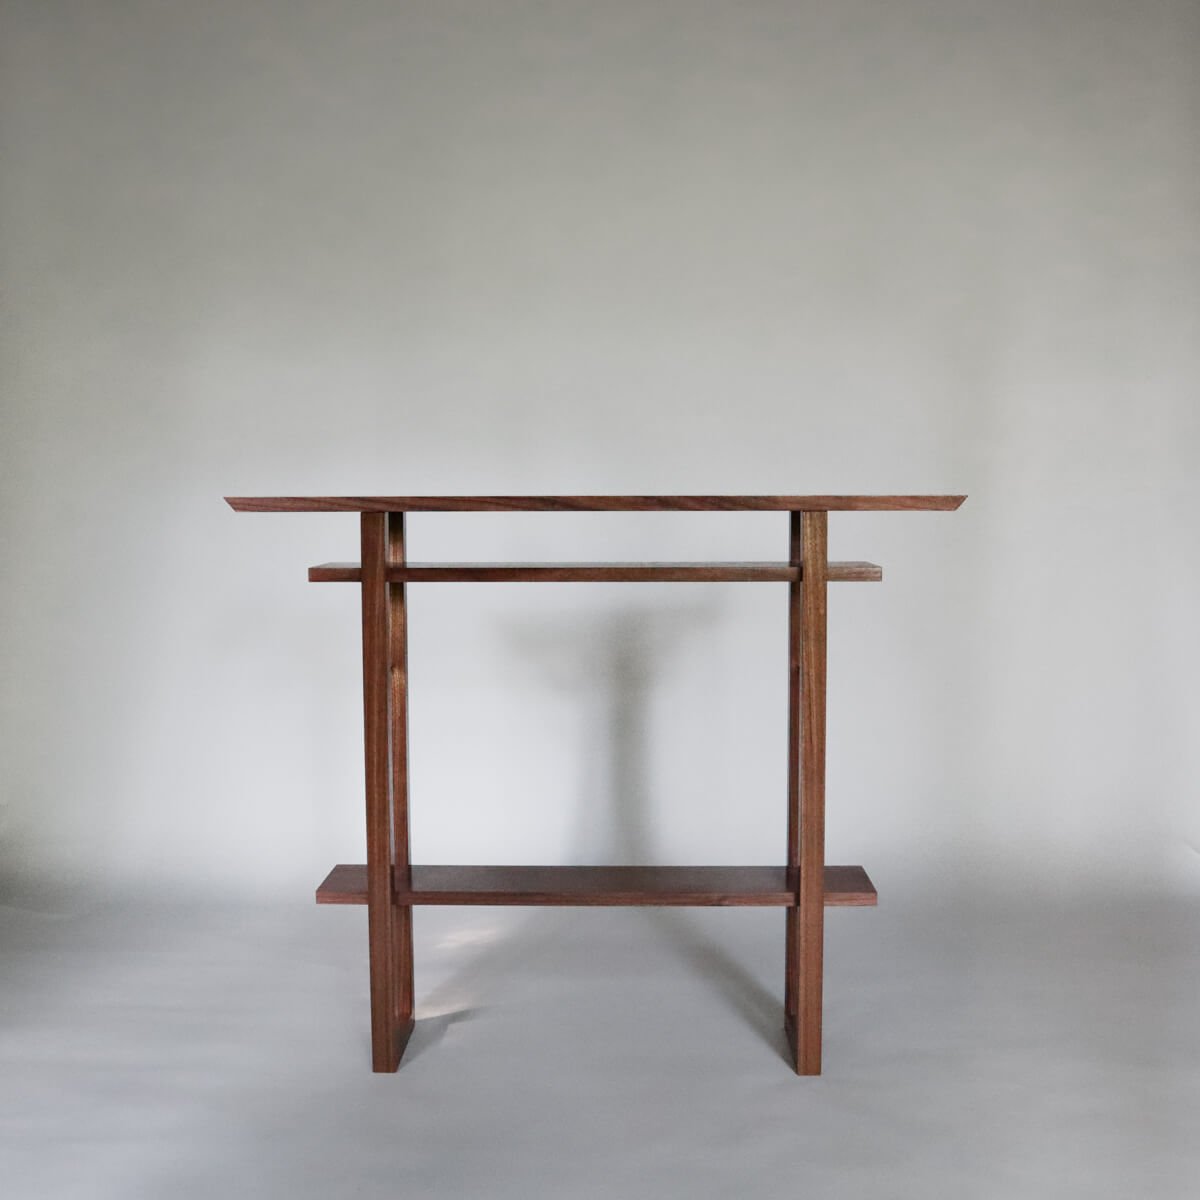 a small modern hall table for entryways created by Mokuzai Furniture